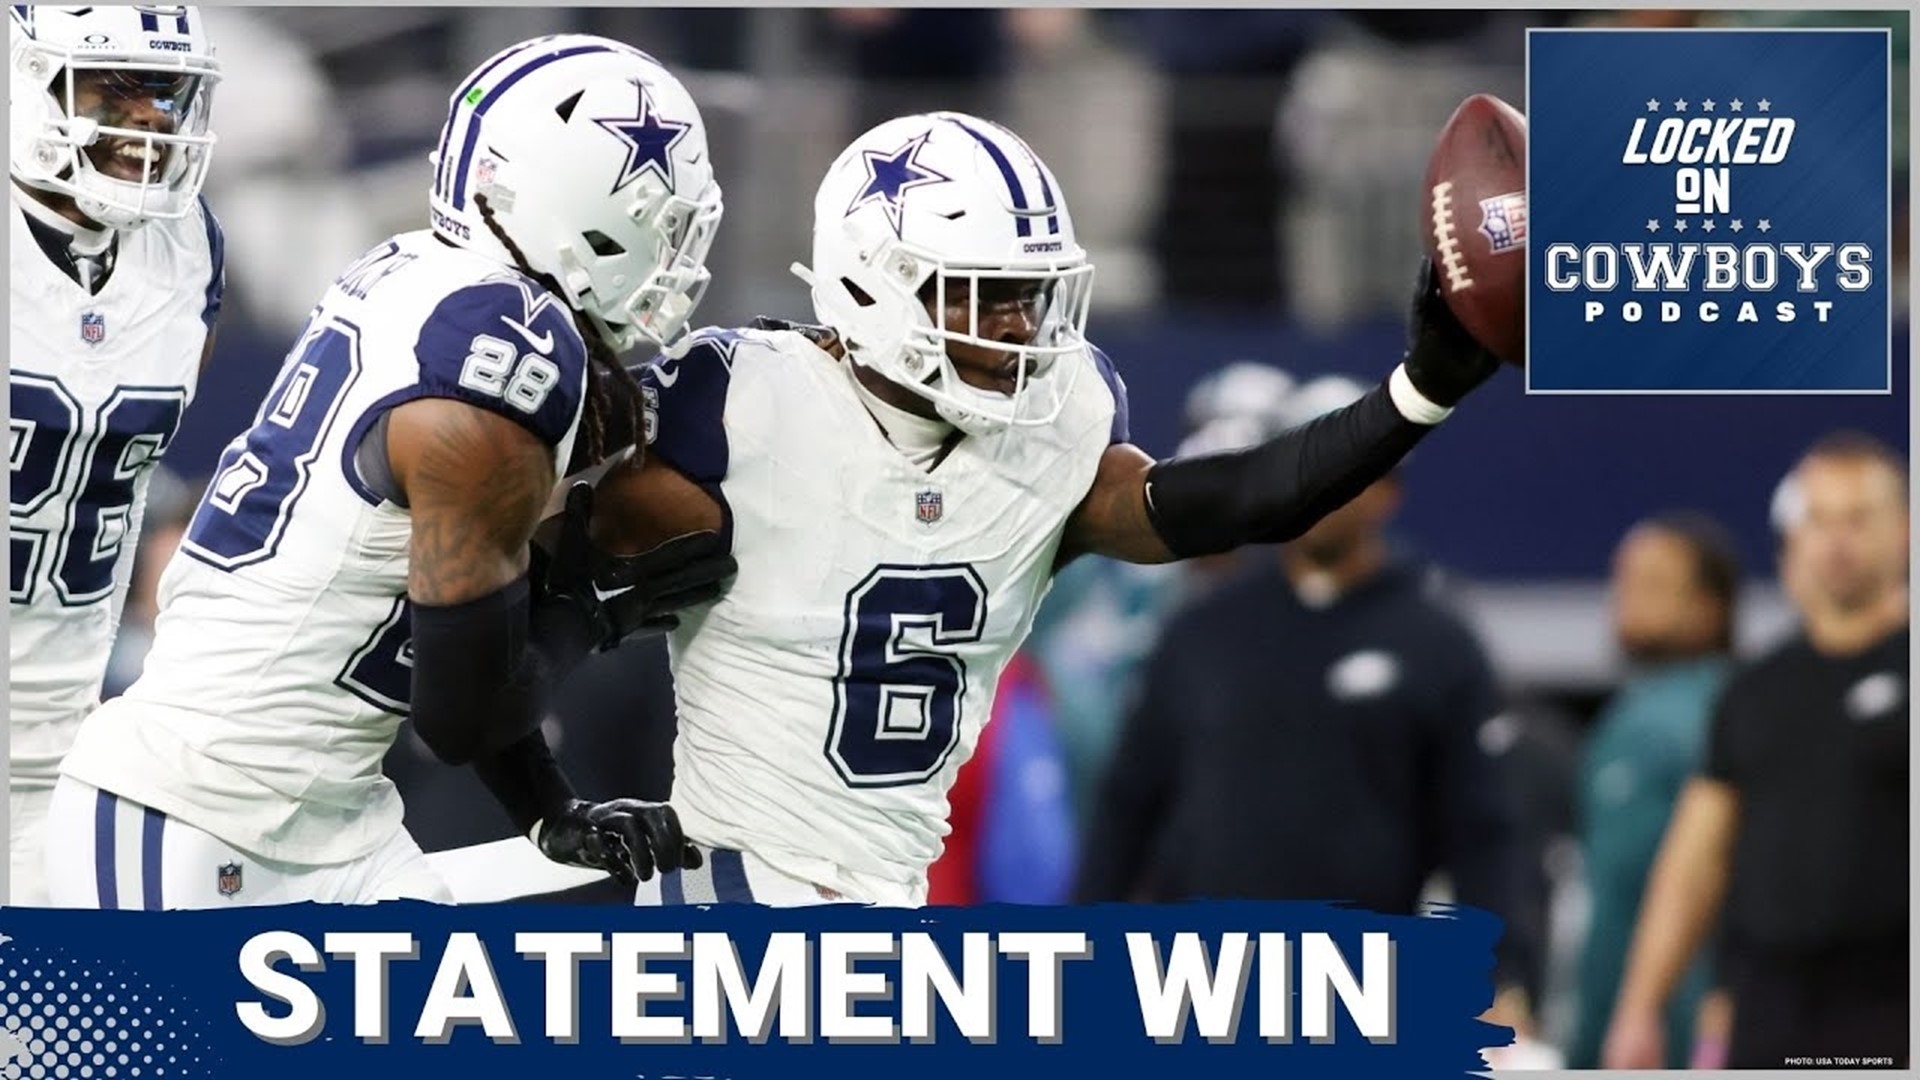 The Dallas Cowboys got a statement win over the Philadelphia Eagles in Week 14, winning 33-13. How big of a win is this for the Cowboys?